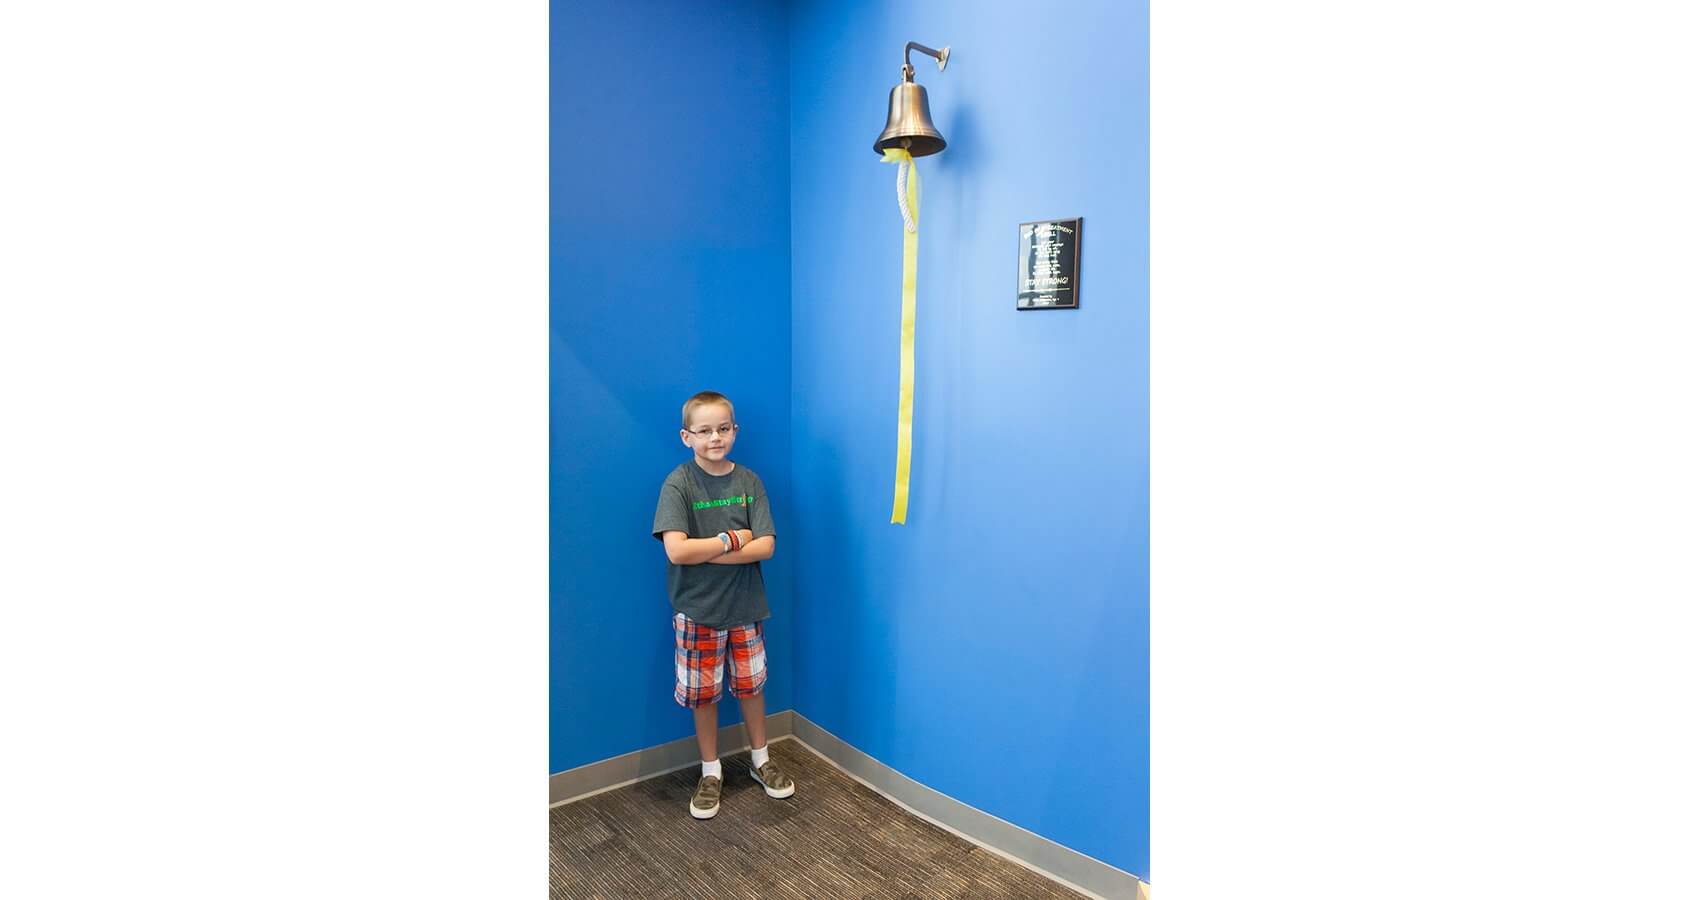 Ethan Williamson stands proudly next to the end of treatment bell after being the first patient to ring the new addition to Texas Children’s. (Credit: John R. Lewis Photography)